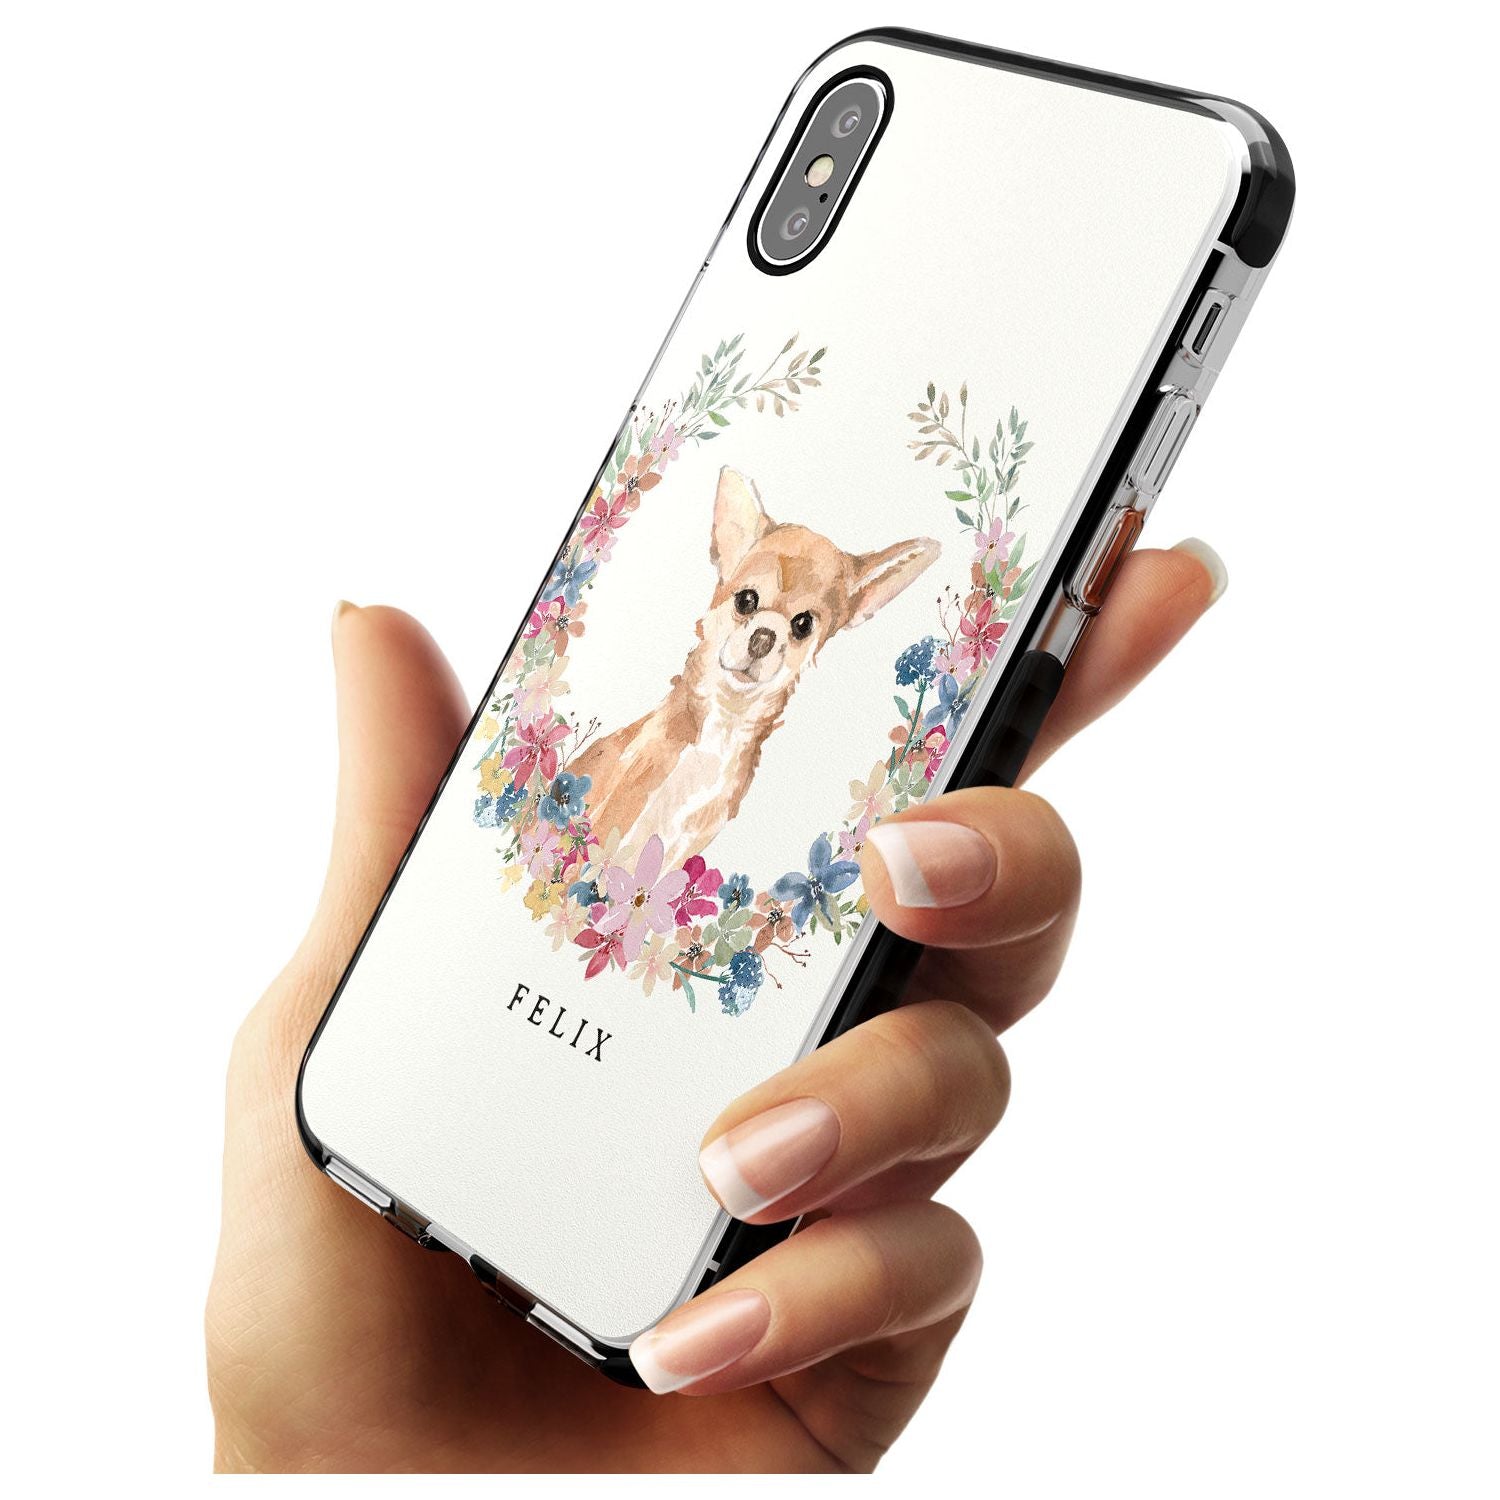 Chihuahua - Watercolour Dog Portrait Black Impact Phone Case for iPhone X XS Max XR